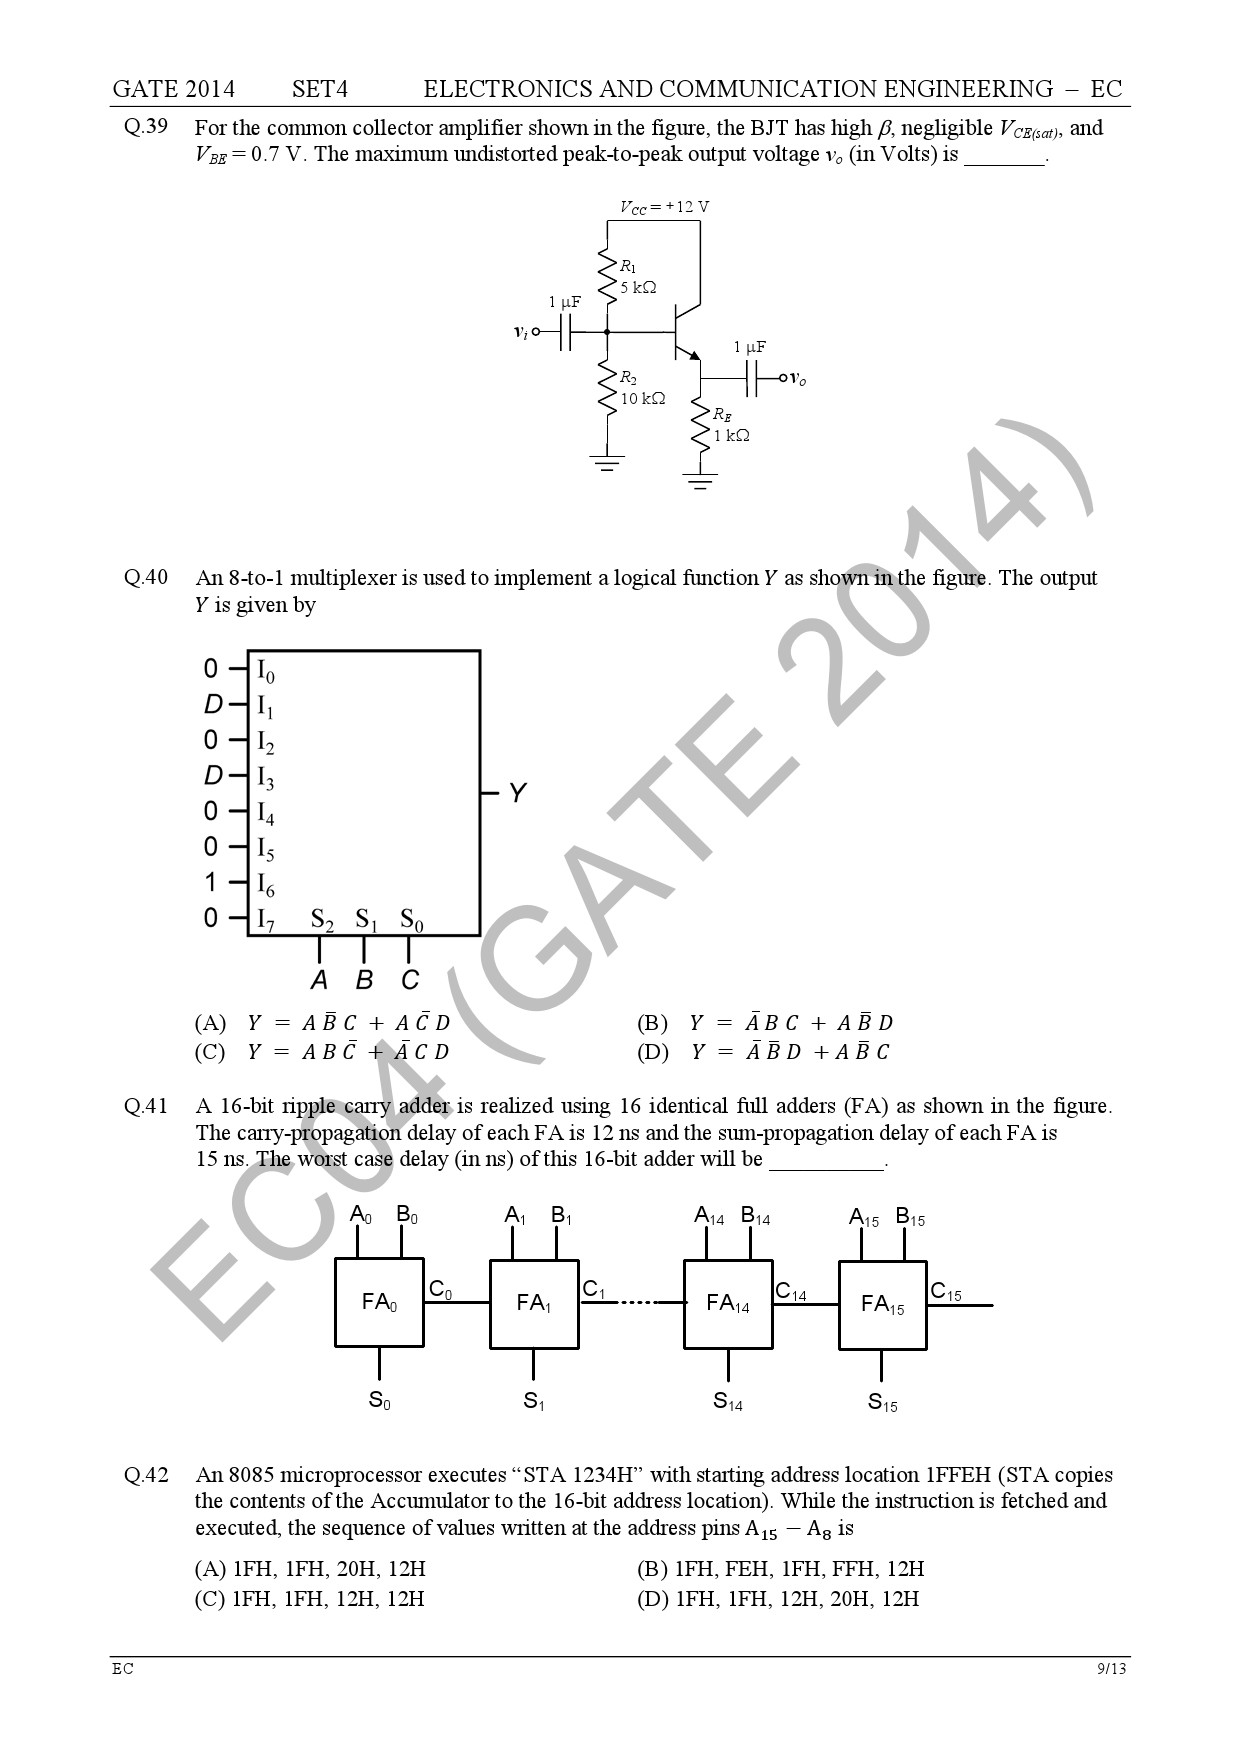 GATE Exam Question Paper 2014 Electronics and Communication Engineering Set 4 15